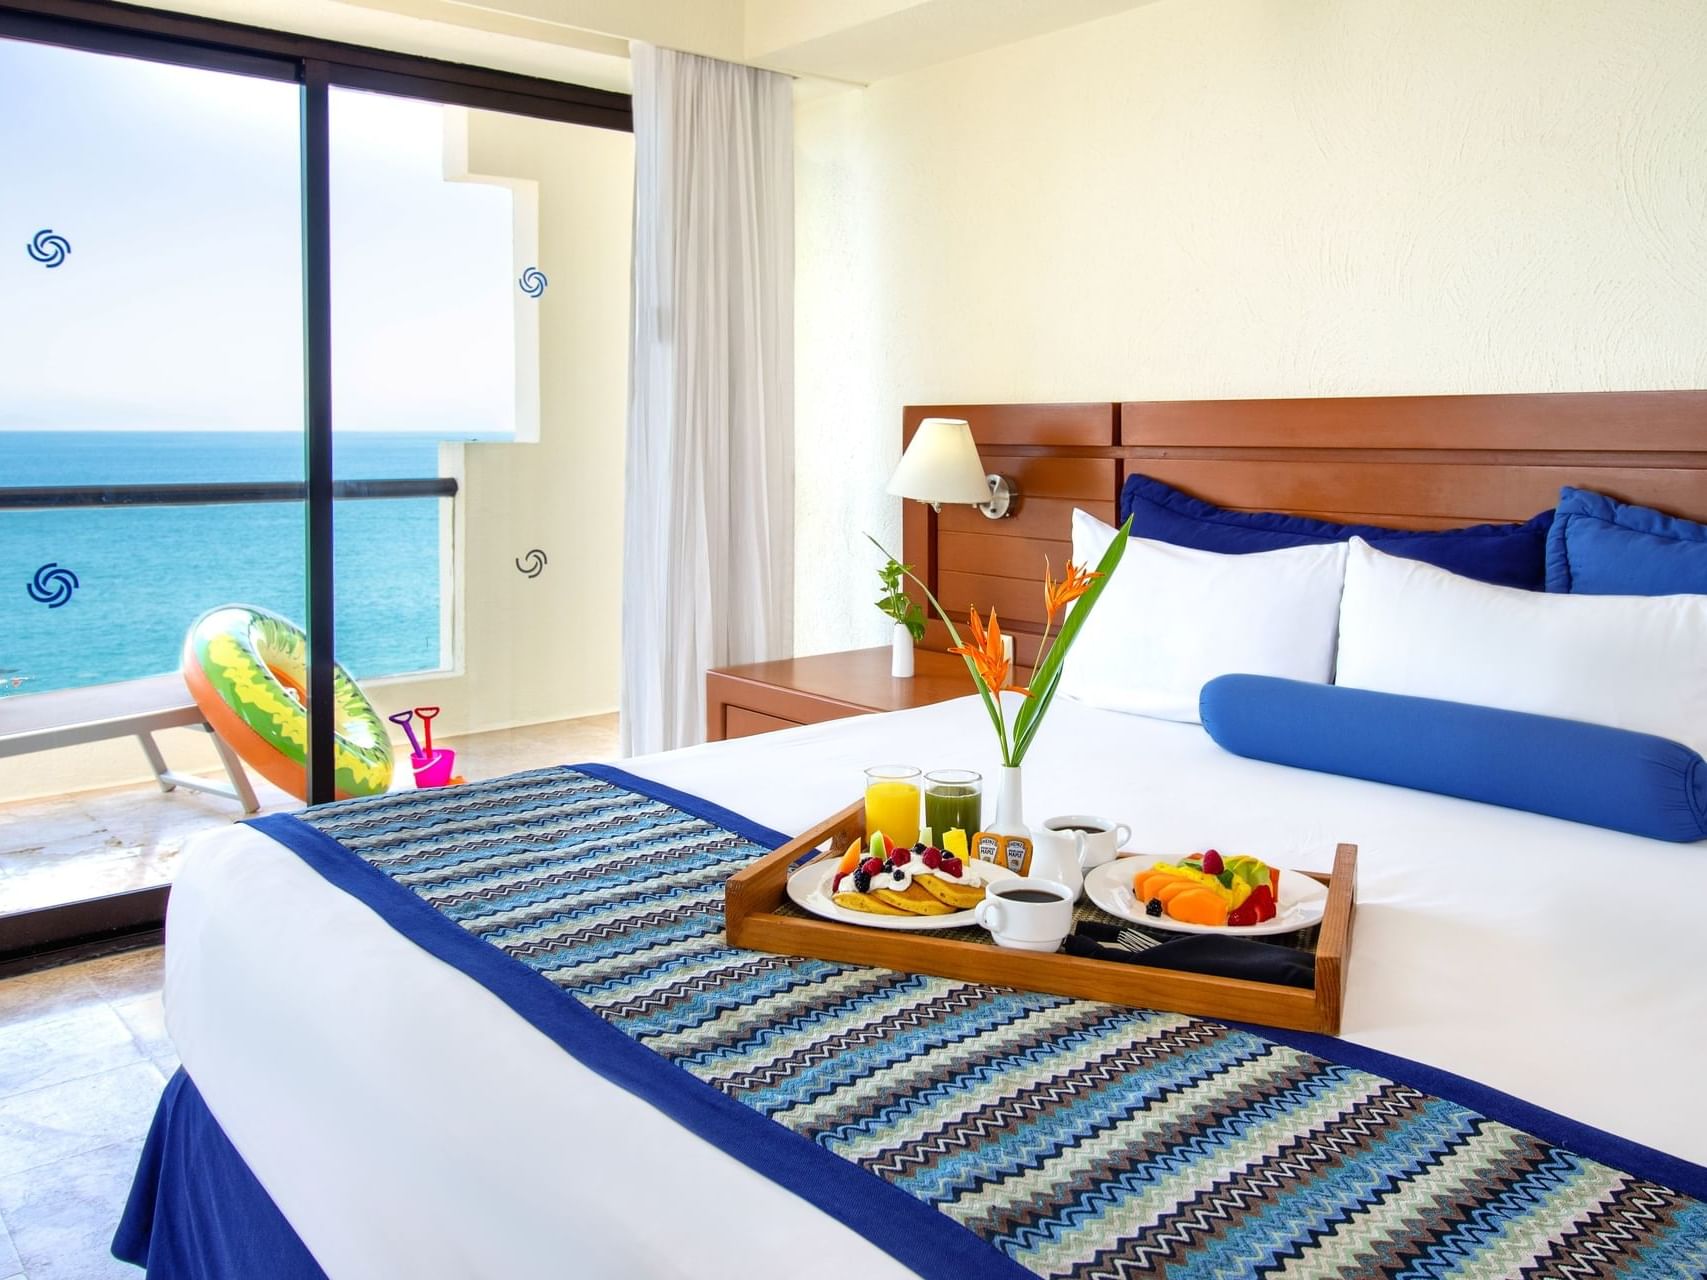 Breakfast served on the bed in 2 Bedroom Family Suite, Ocean View at Plaza Pelicanos Grand Beach Resort